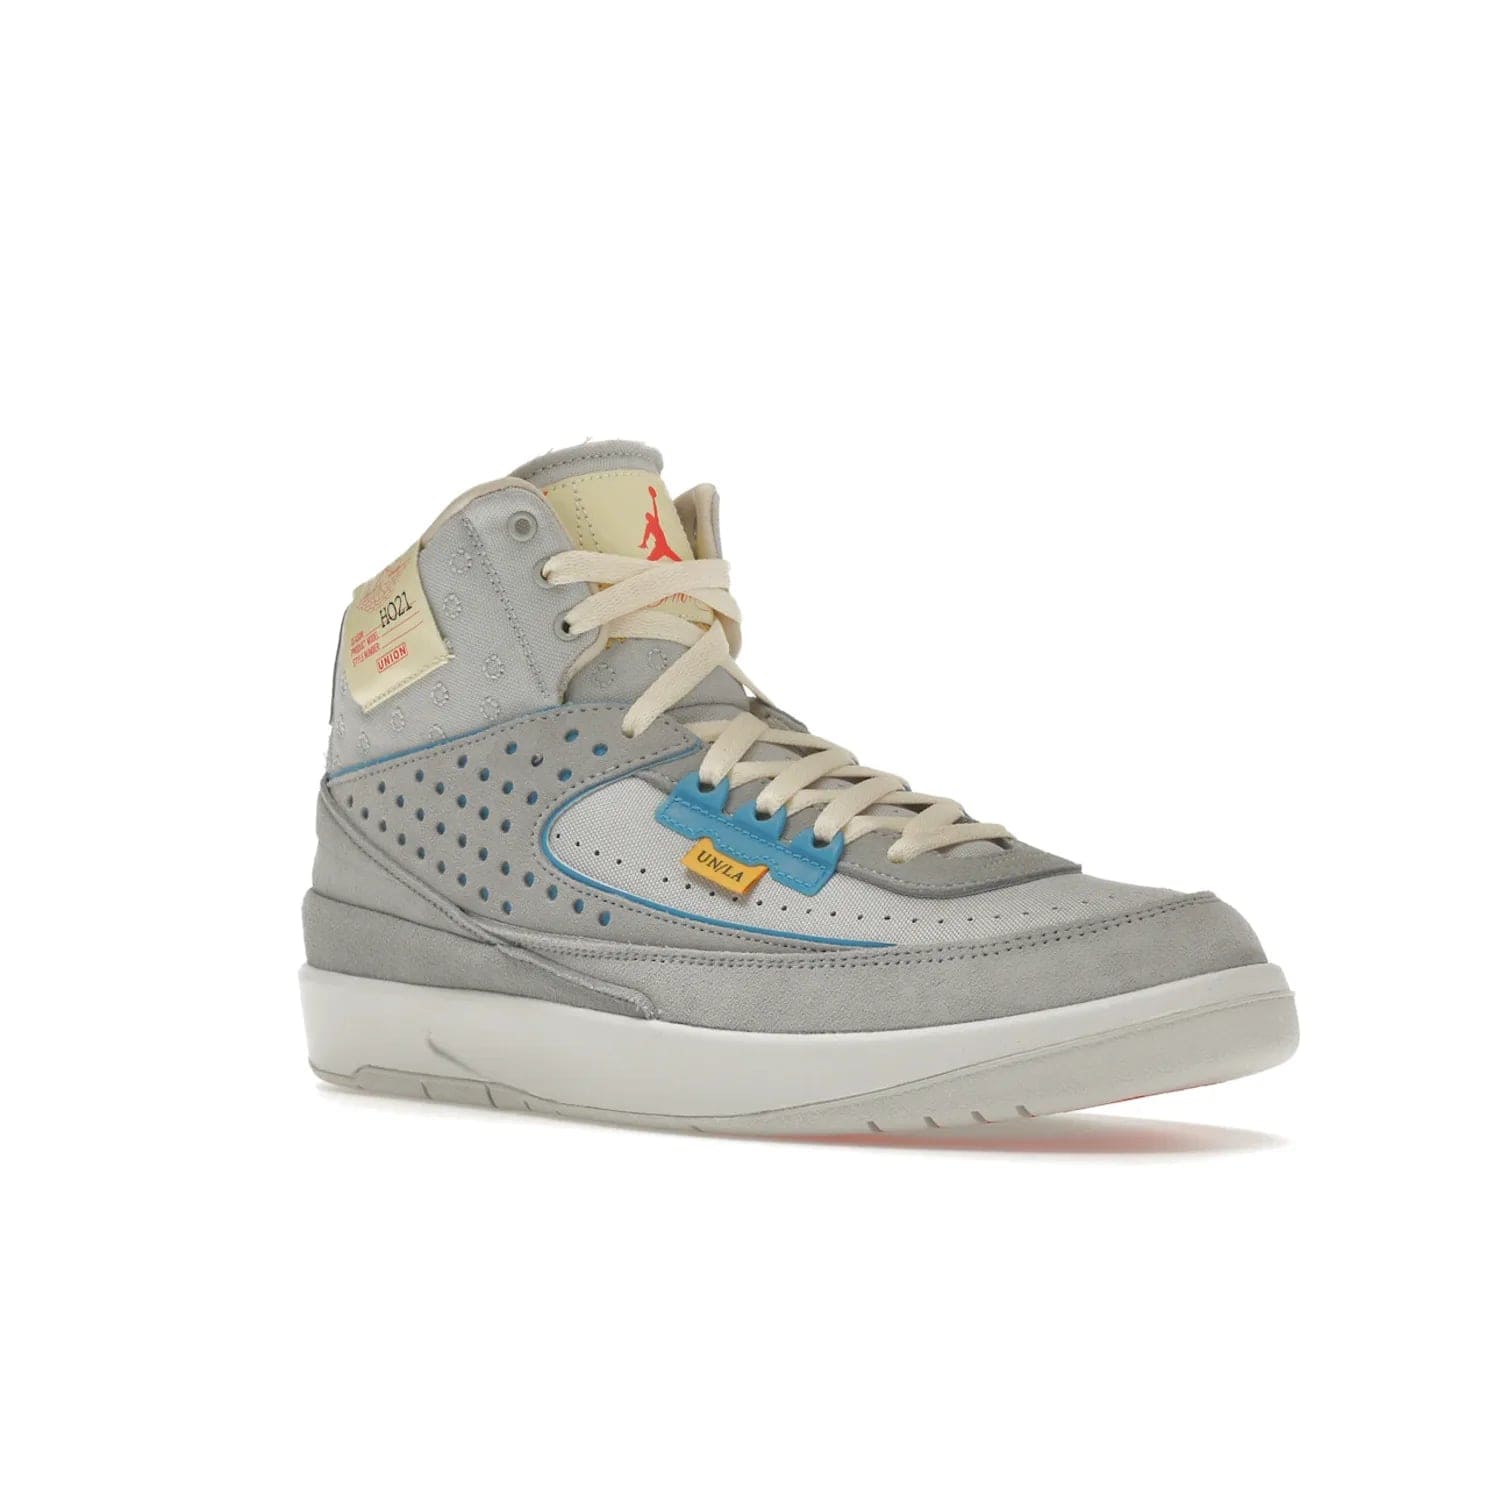 Jordan 2 Retro SP Union Grey Fog - Image 5 - Only at www.BallersClubKickz.com - Introducing the Air Jordan 2 Retro SP Union Grey Fog. This intricate sneaker design features a grey canvas upper with light blue eyelets, eyestay patches, and piping, plus custom external tags. Dropping in April 2022, this exclusive release offers a worn-in look and feel.